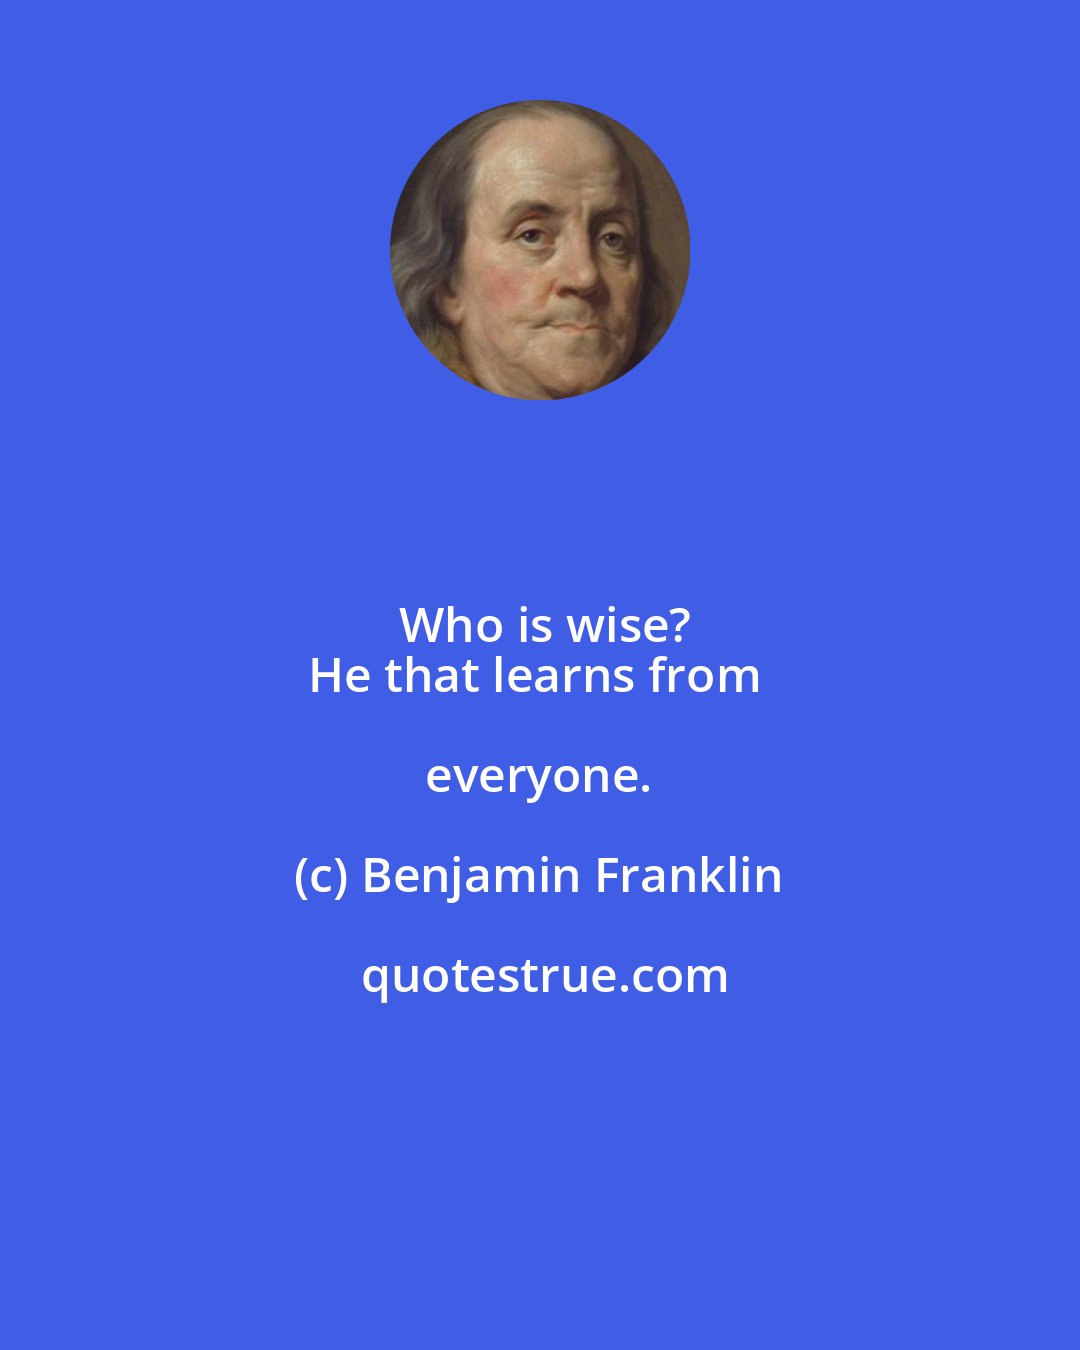 Benjamin Franklin: Who is wise?
He that learns from everyone.